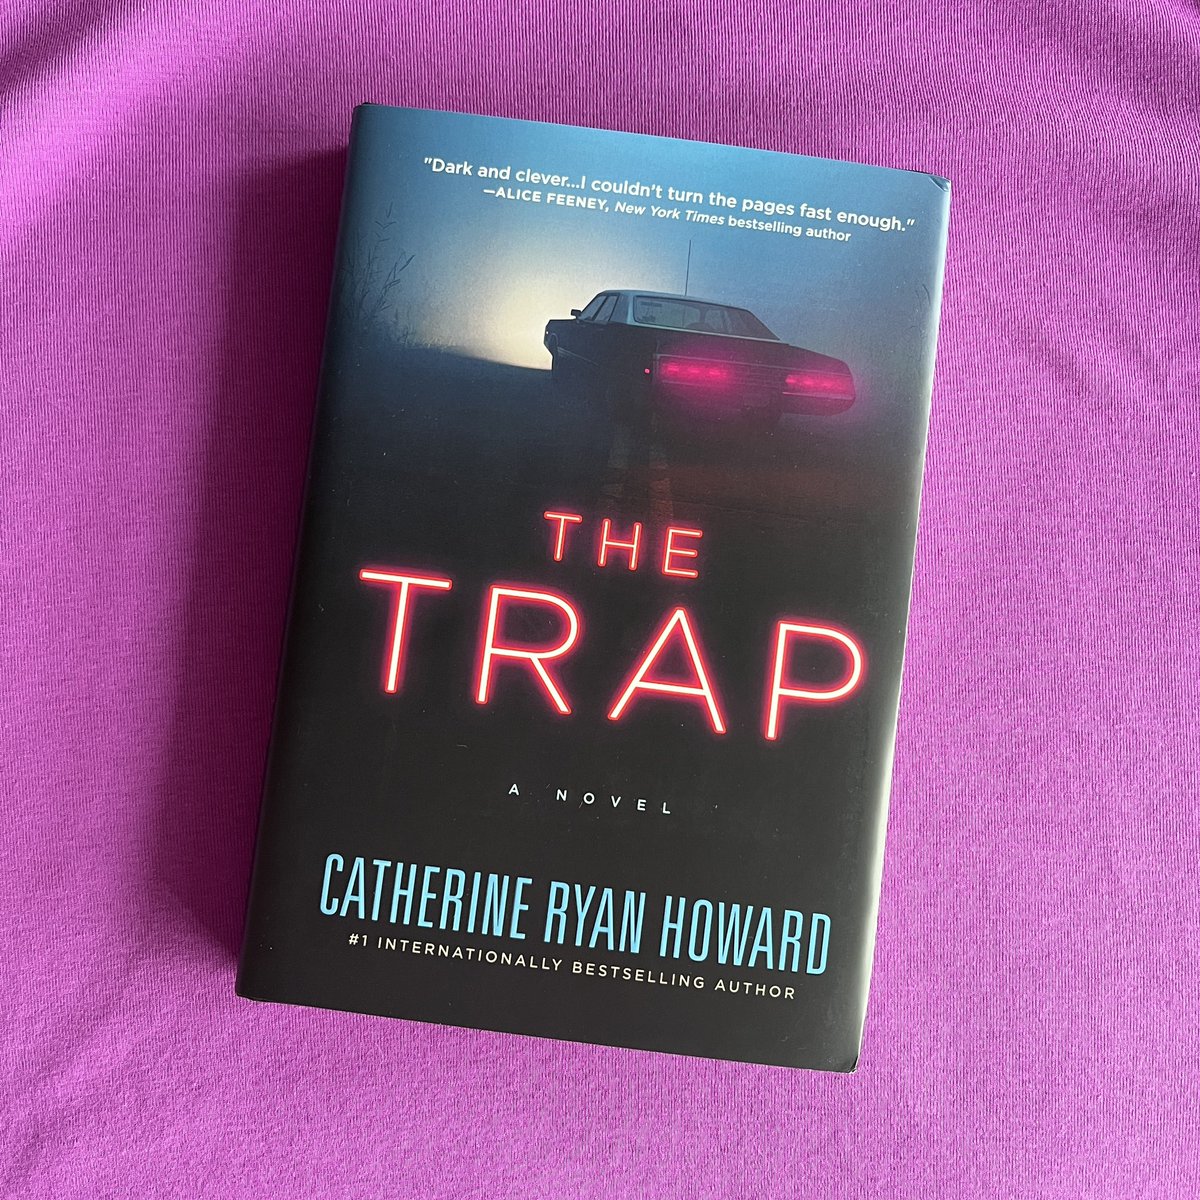 THE TRAP hits 🇺🇸 shelves today! ‘Catherine Ryan Howard always delivers, and [this] might be her most electrifying thriller yet … [it] takes a classic crime story and twists it into something vast, emotional, and absolutely terrifying.’ Flynn Berry linktr.ee/cathryanhoward